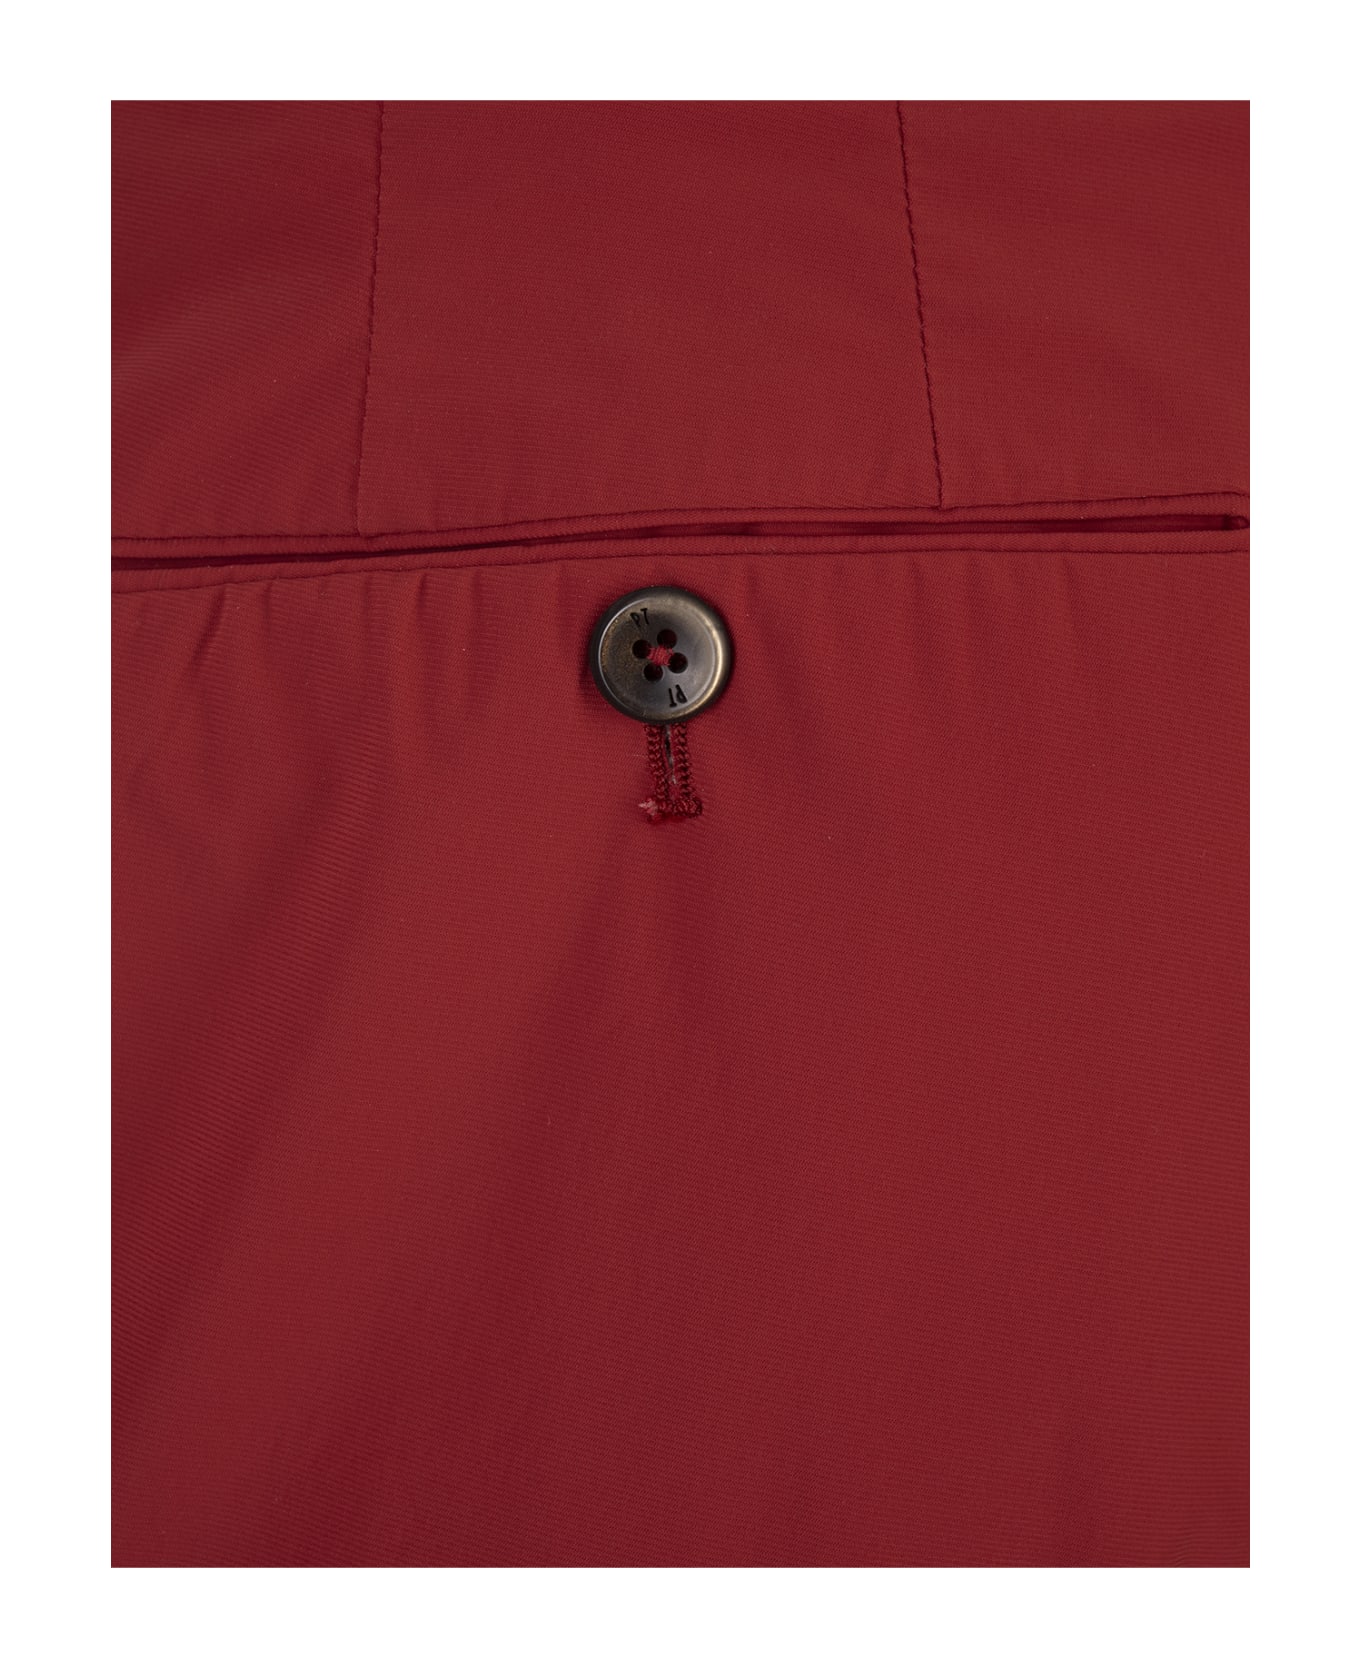 PT Torino Red Stretch Cotton Shorts - Red